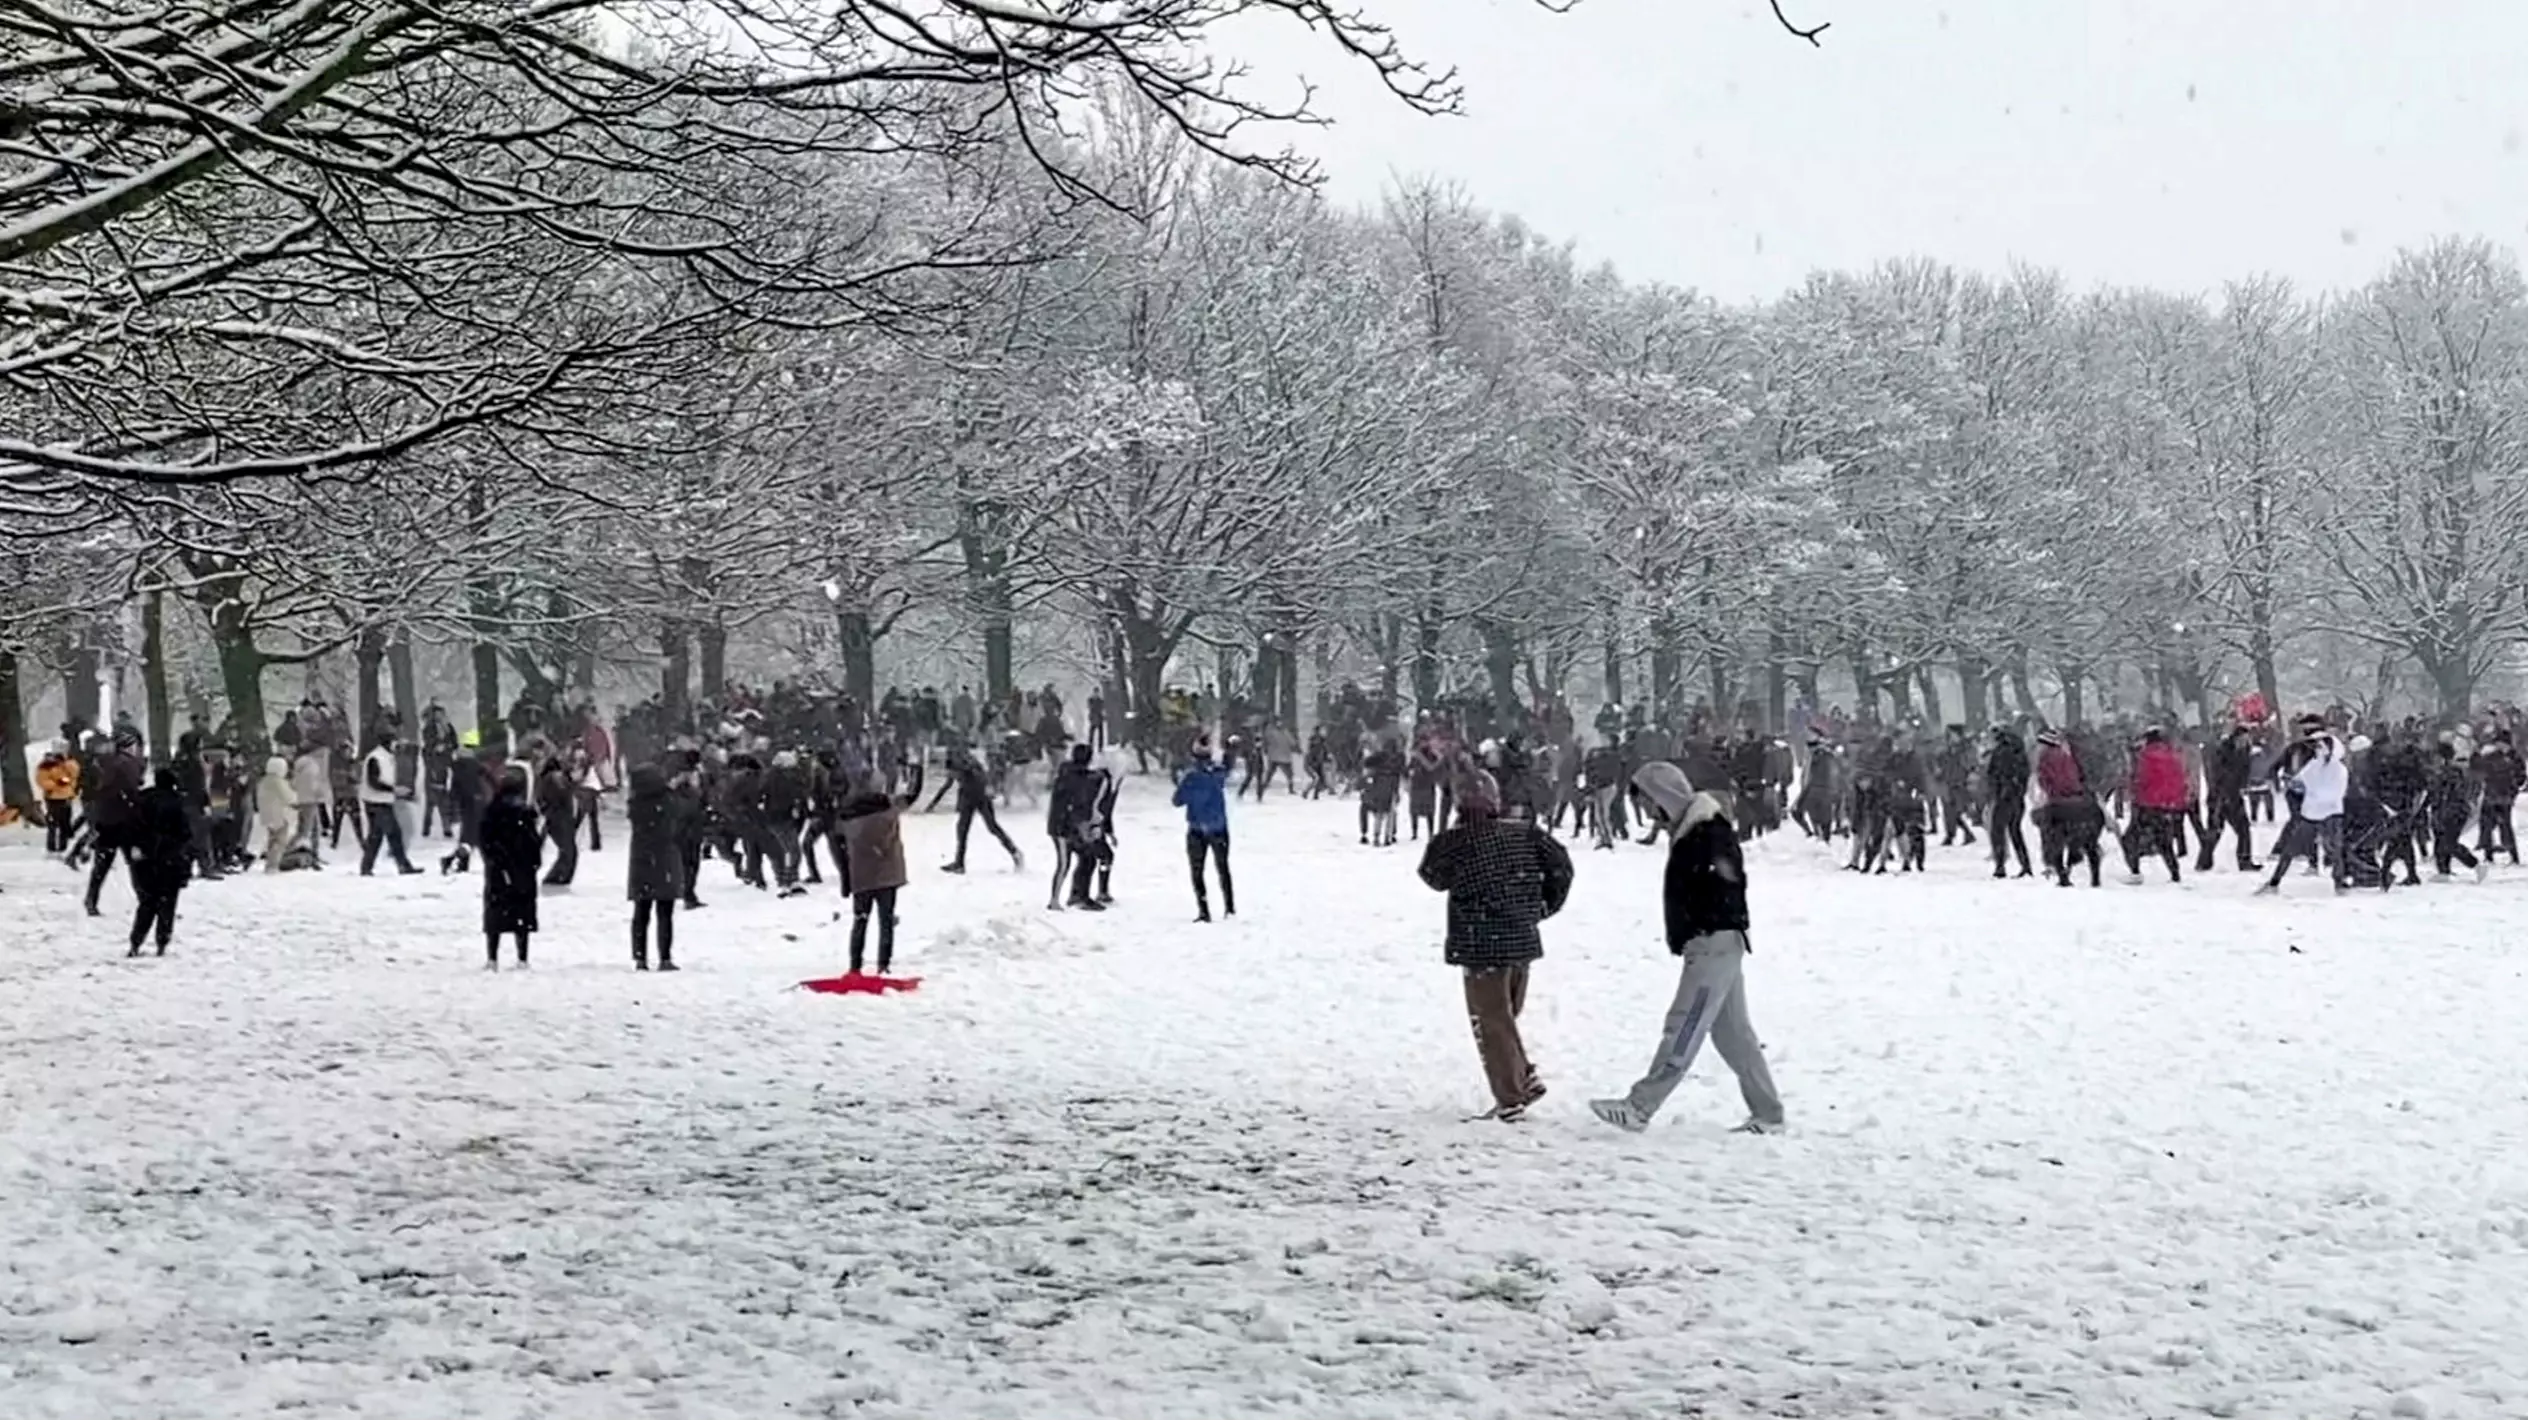 Two Men Fined £10,000 Over Snowball Fight In Leeds